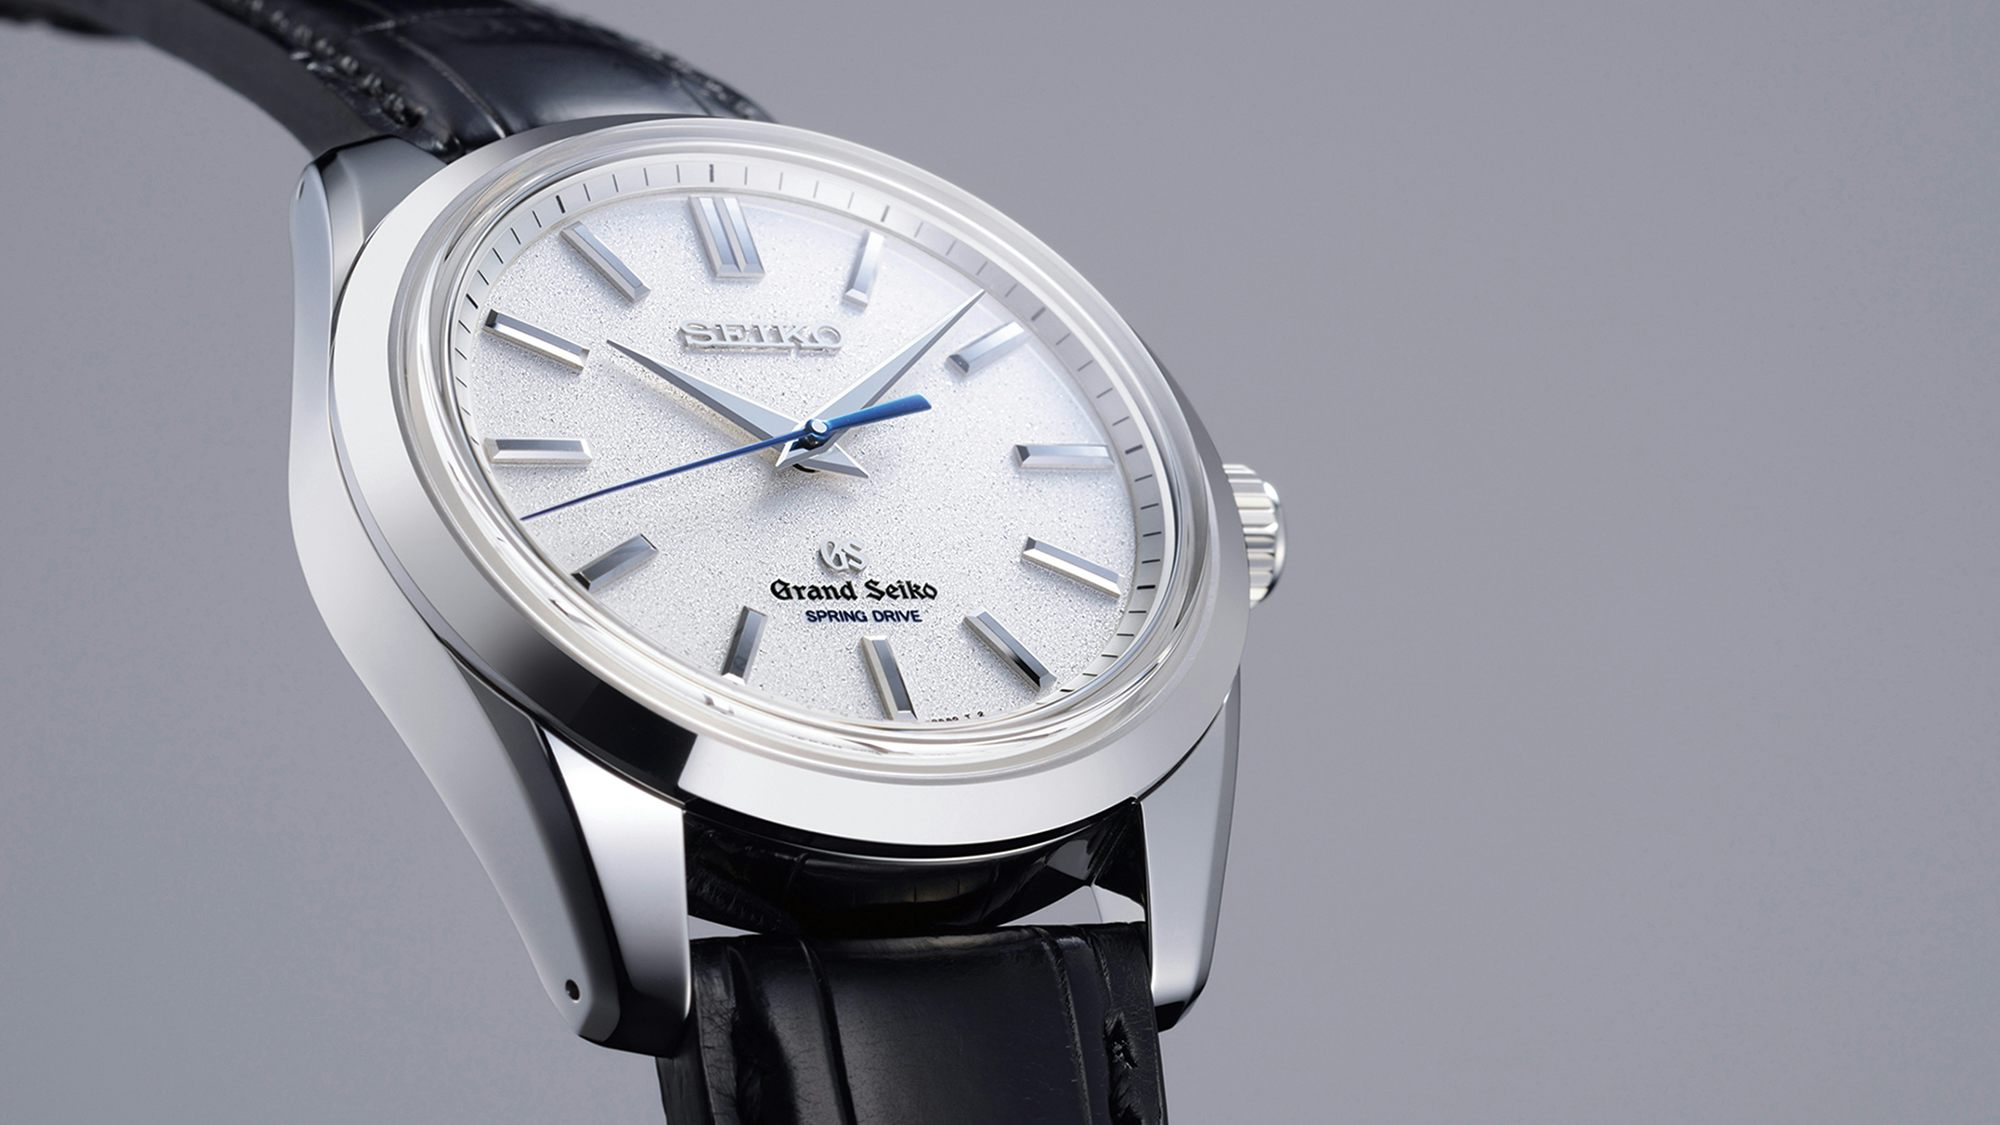 Introducing: The Grand Seiko Spring Drive 8 Day Power Reserve - Hodinkee